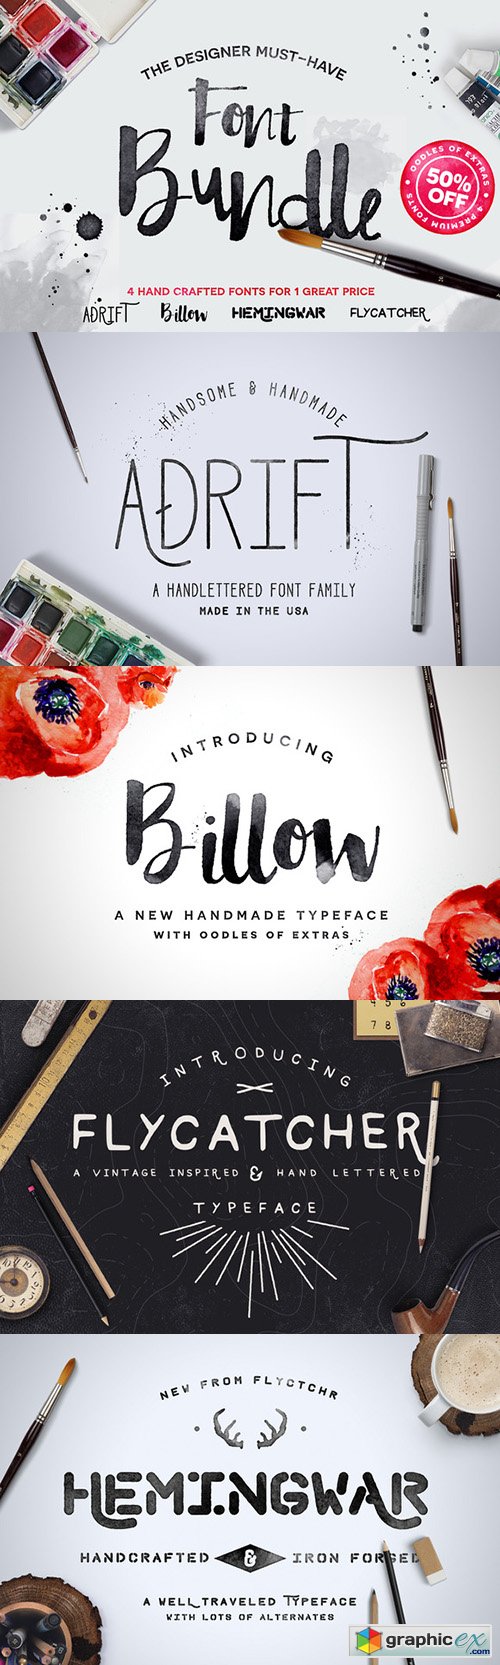 Hand Crafted Font Bundle